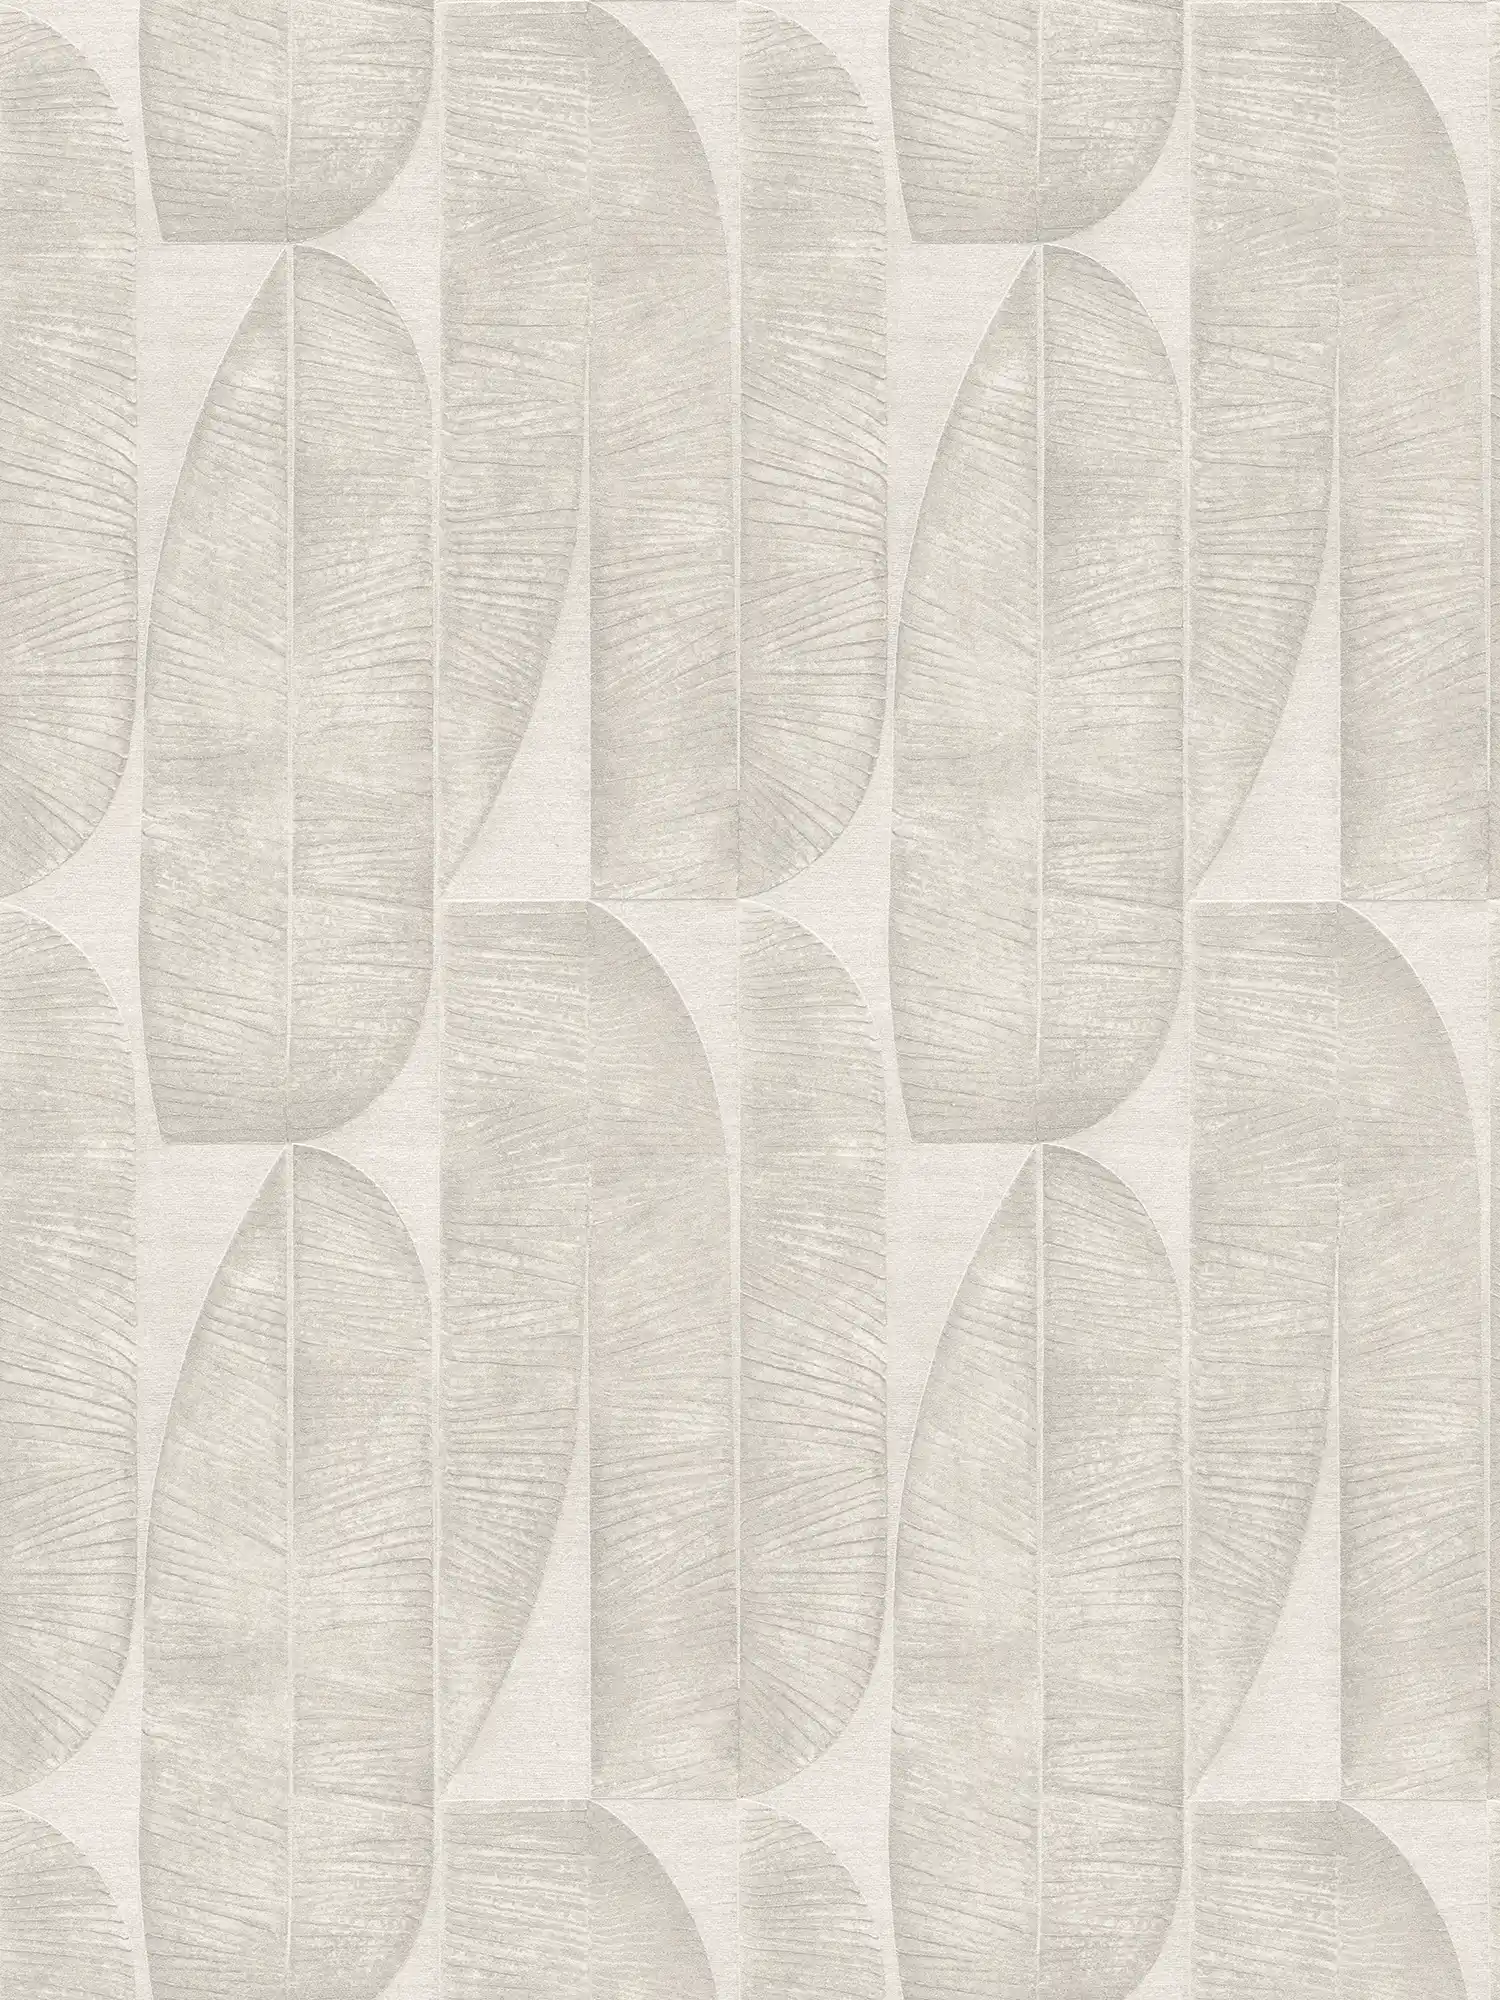 Non-woven wallpaper with geometric floral pattern - grey, beige
